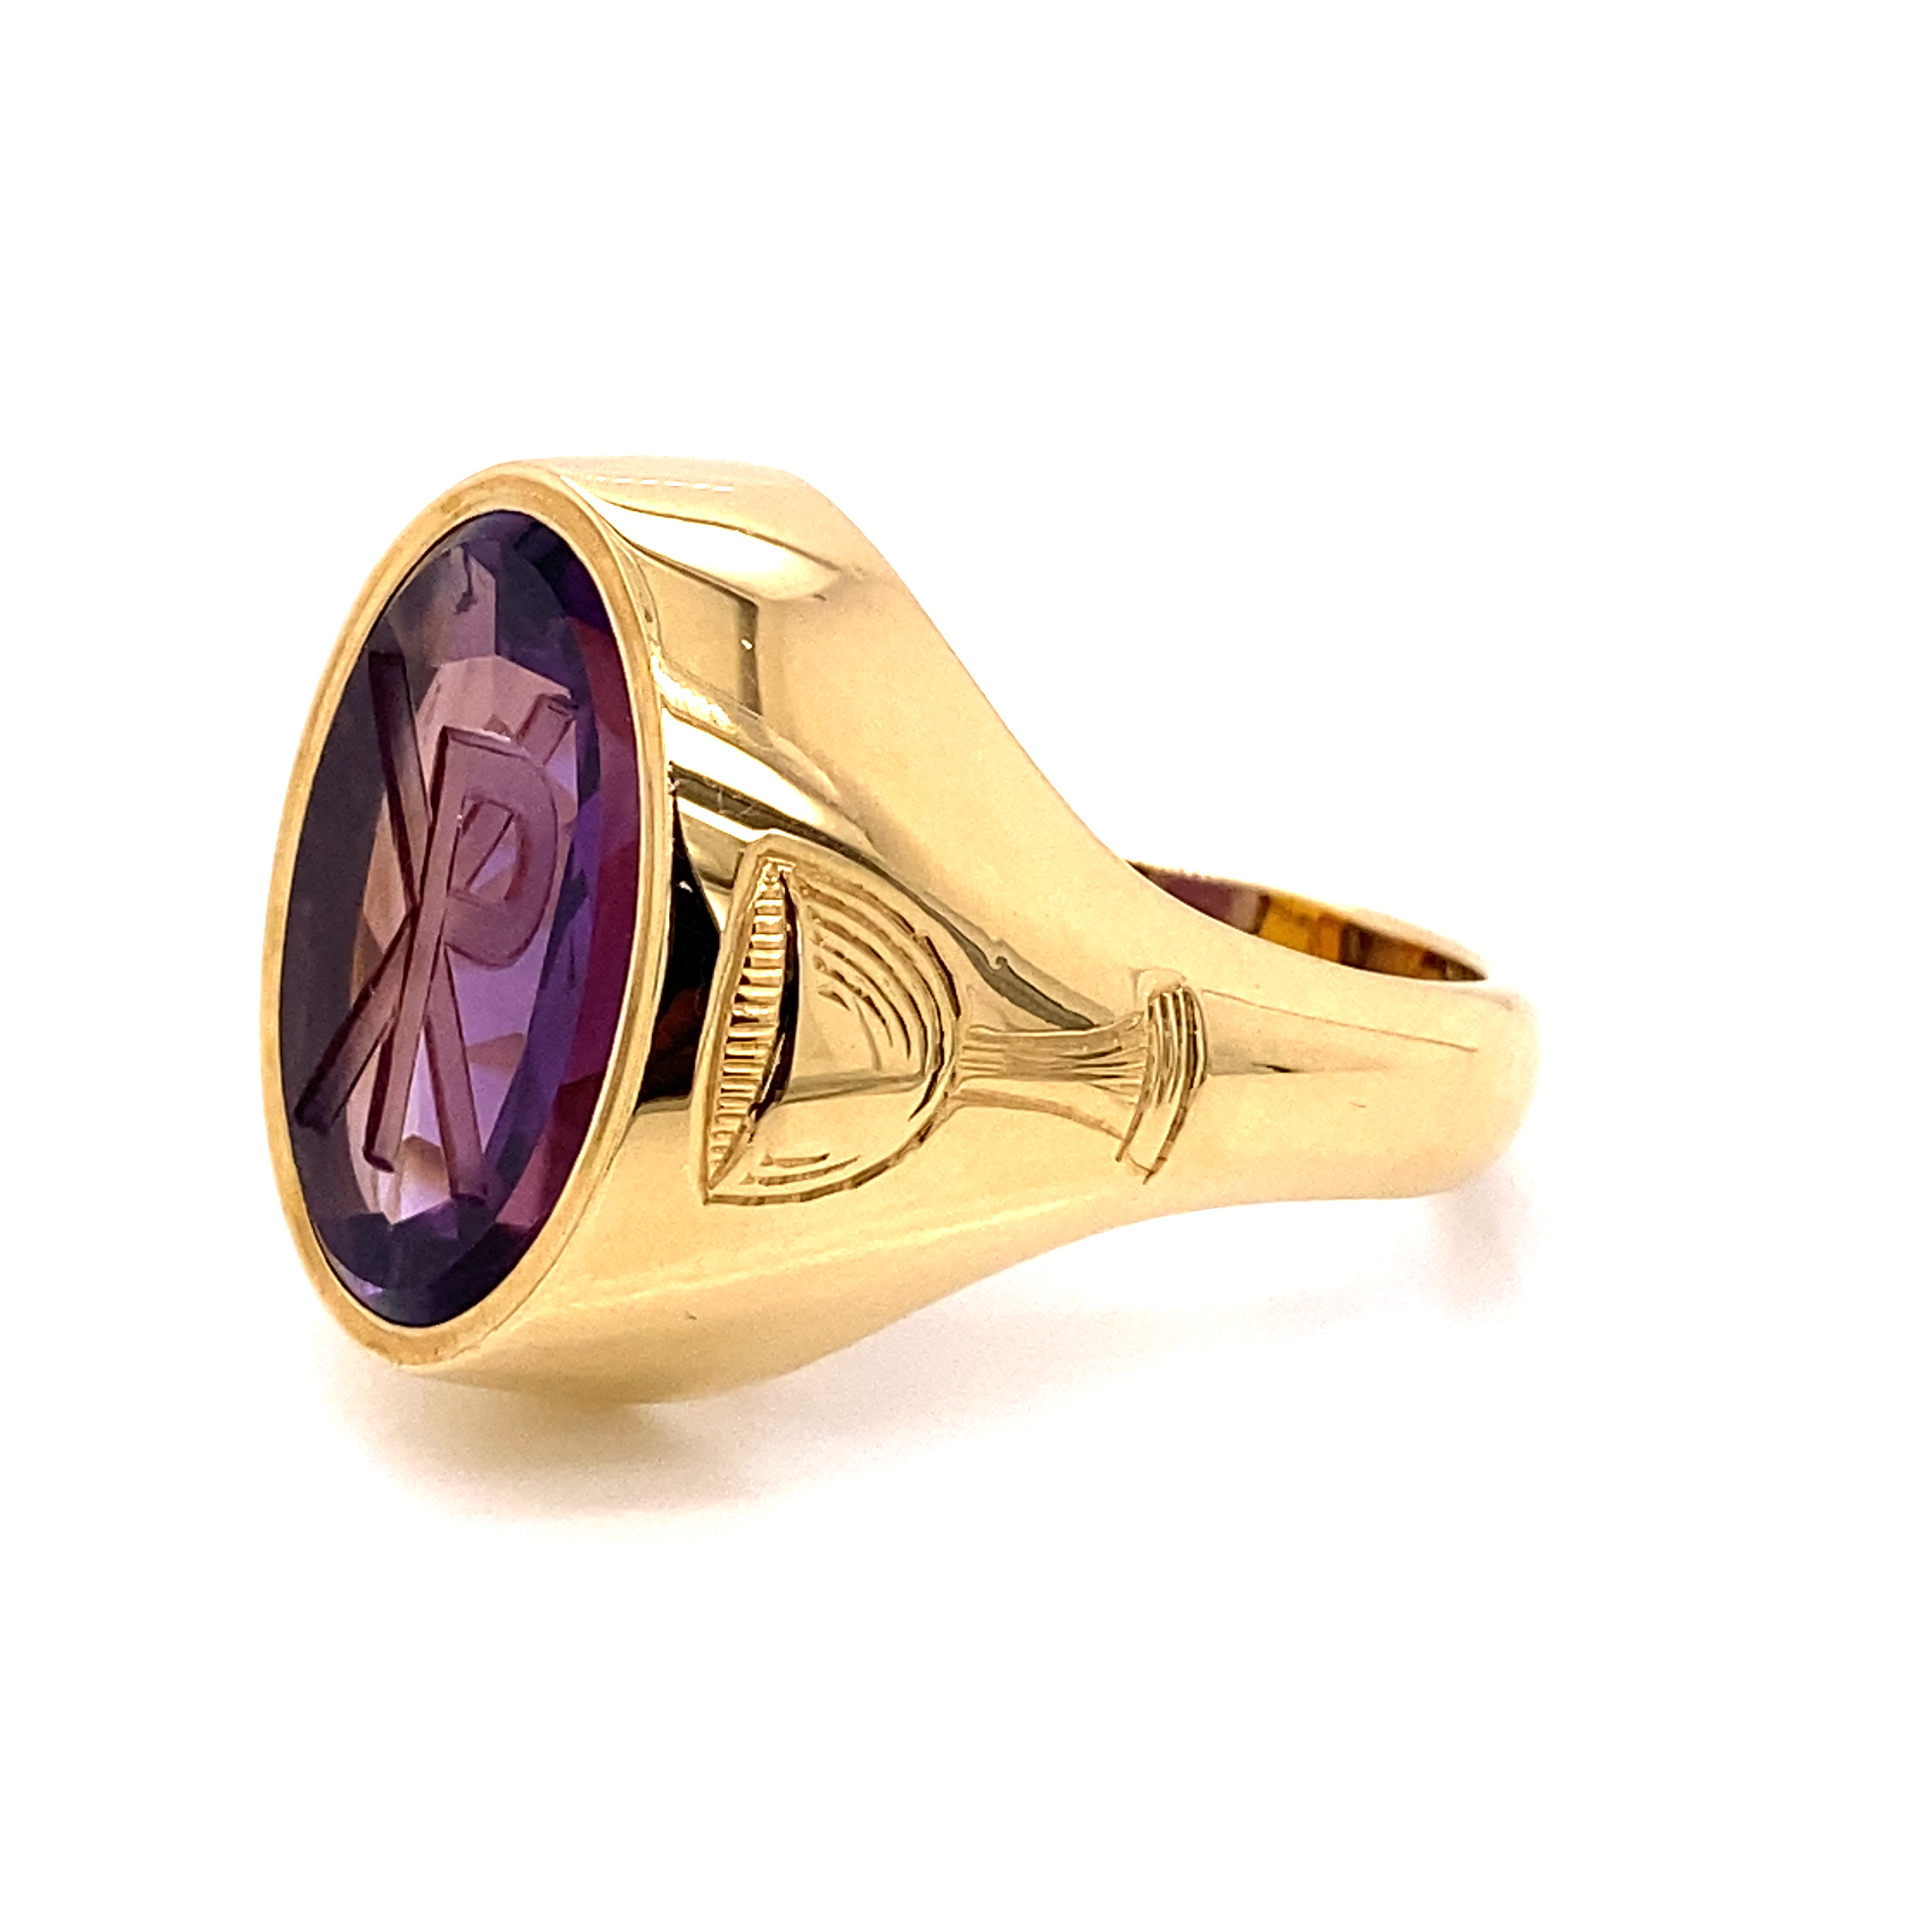 The Chi Rho GOLD RING whith amethyst